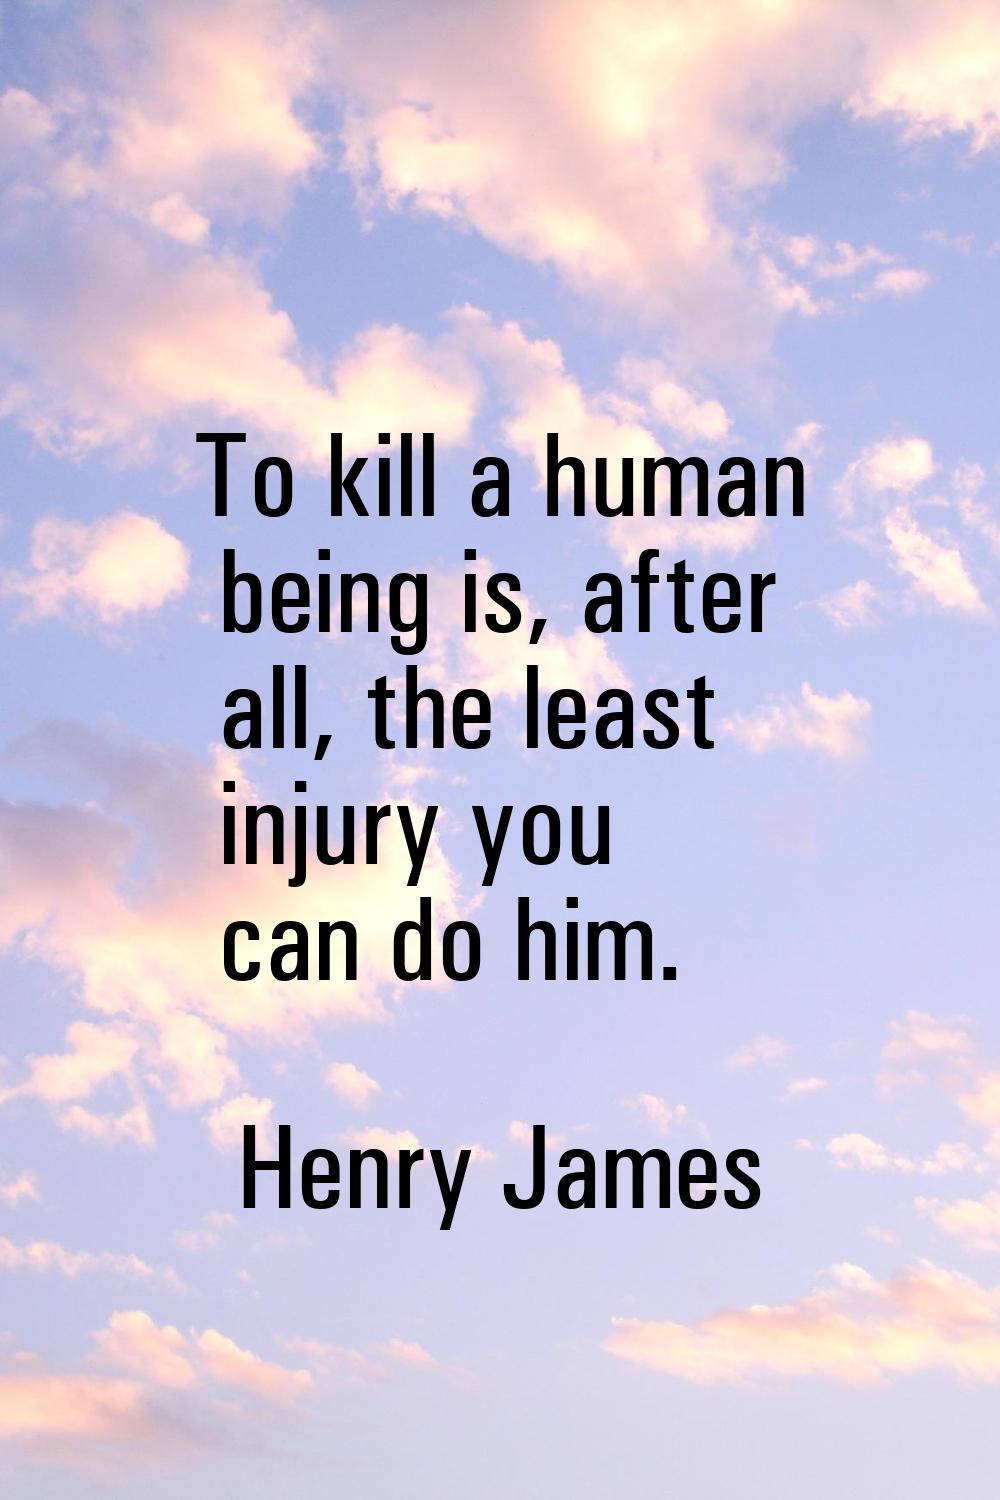 To kill a human being is, after all, the least injury you can do him.